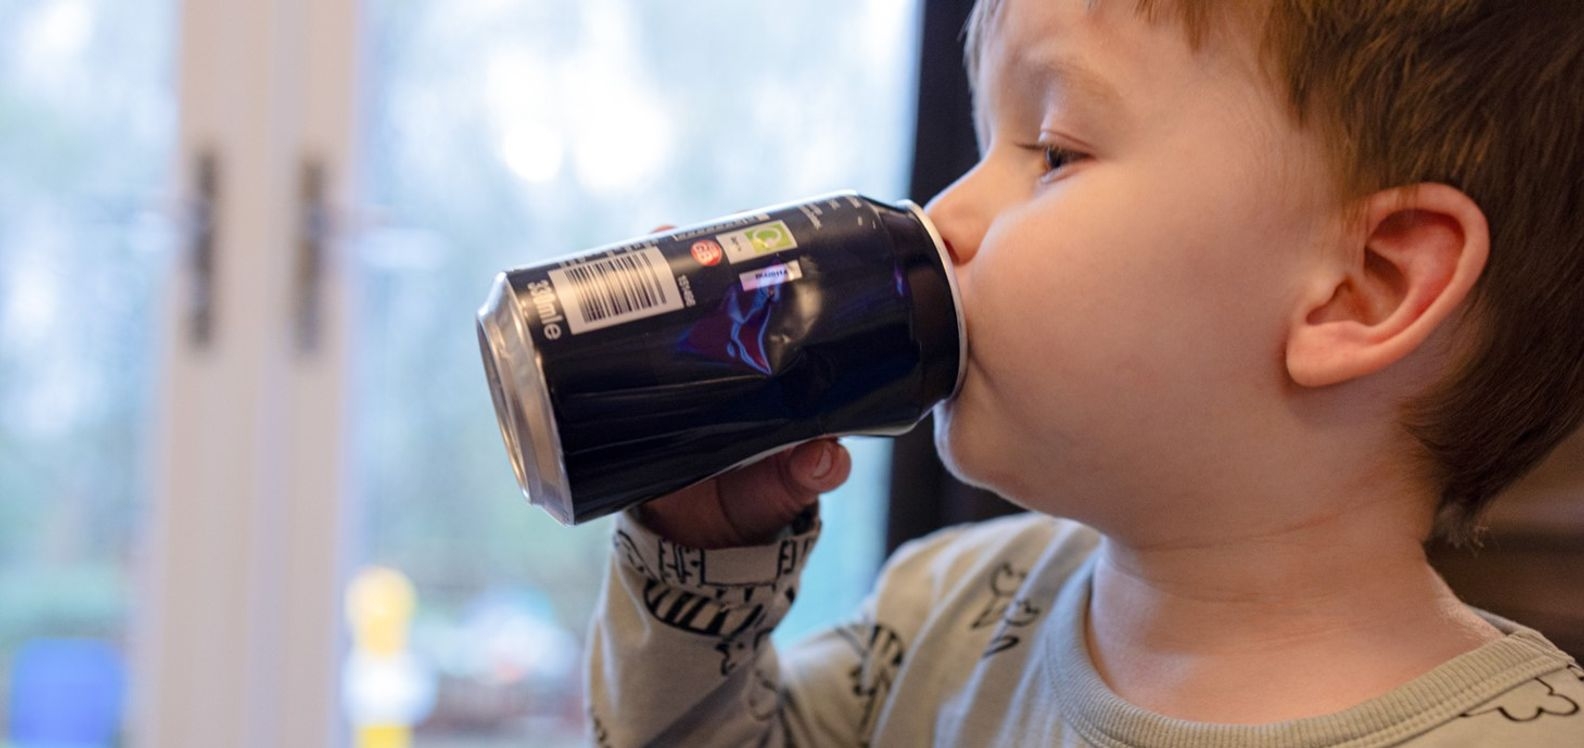 CHOOSING SUGARY DRINKS OVER FRUIT JUICE FOR TODDLERS LINKED TO RISK OF ADULT OBESITY